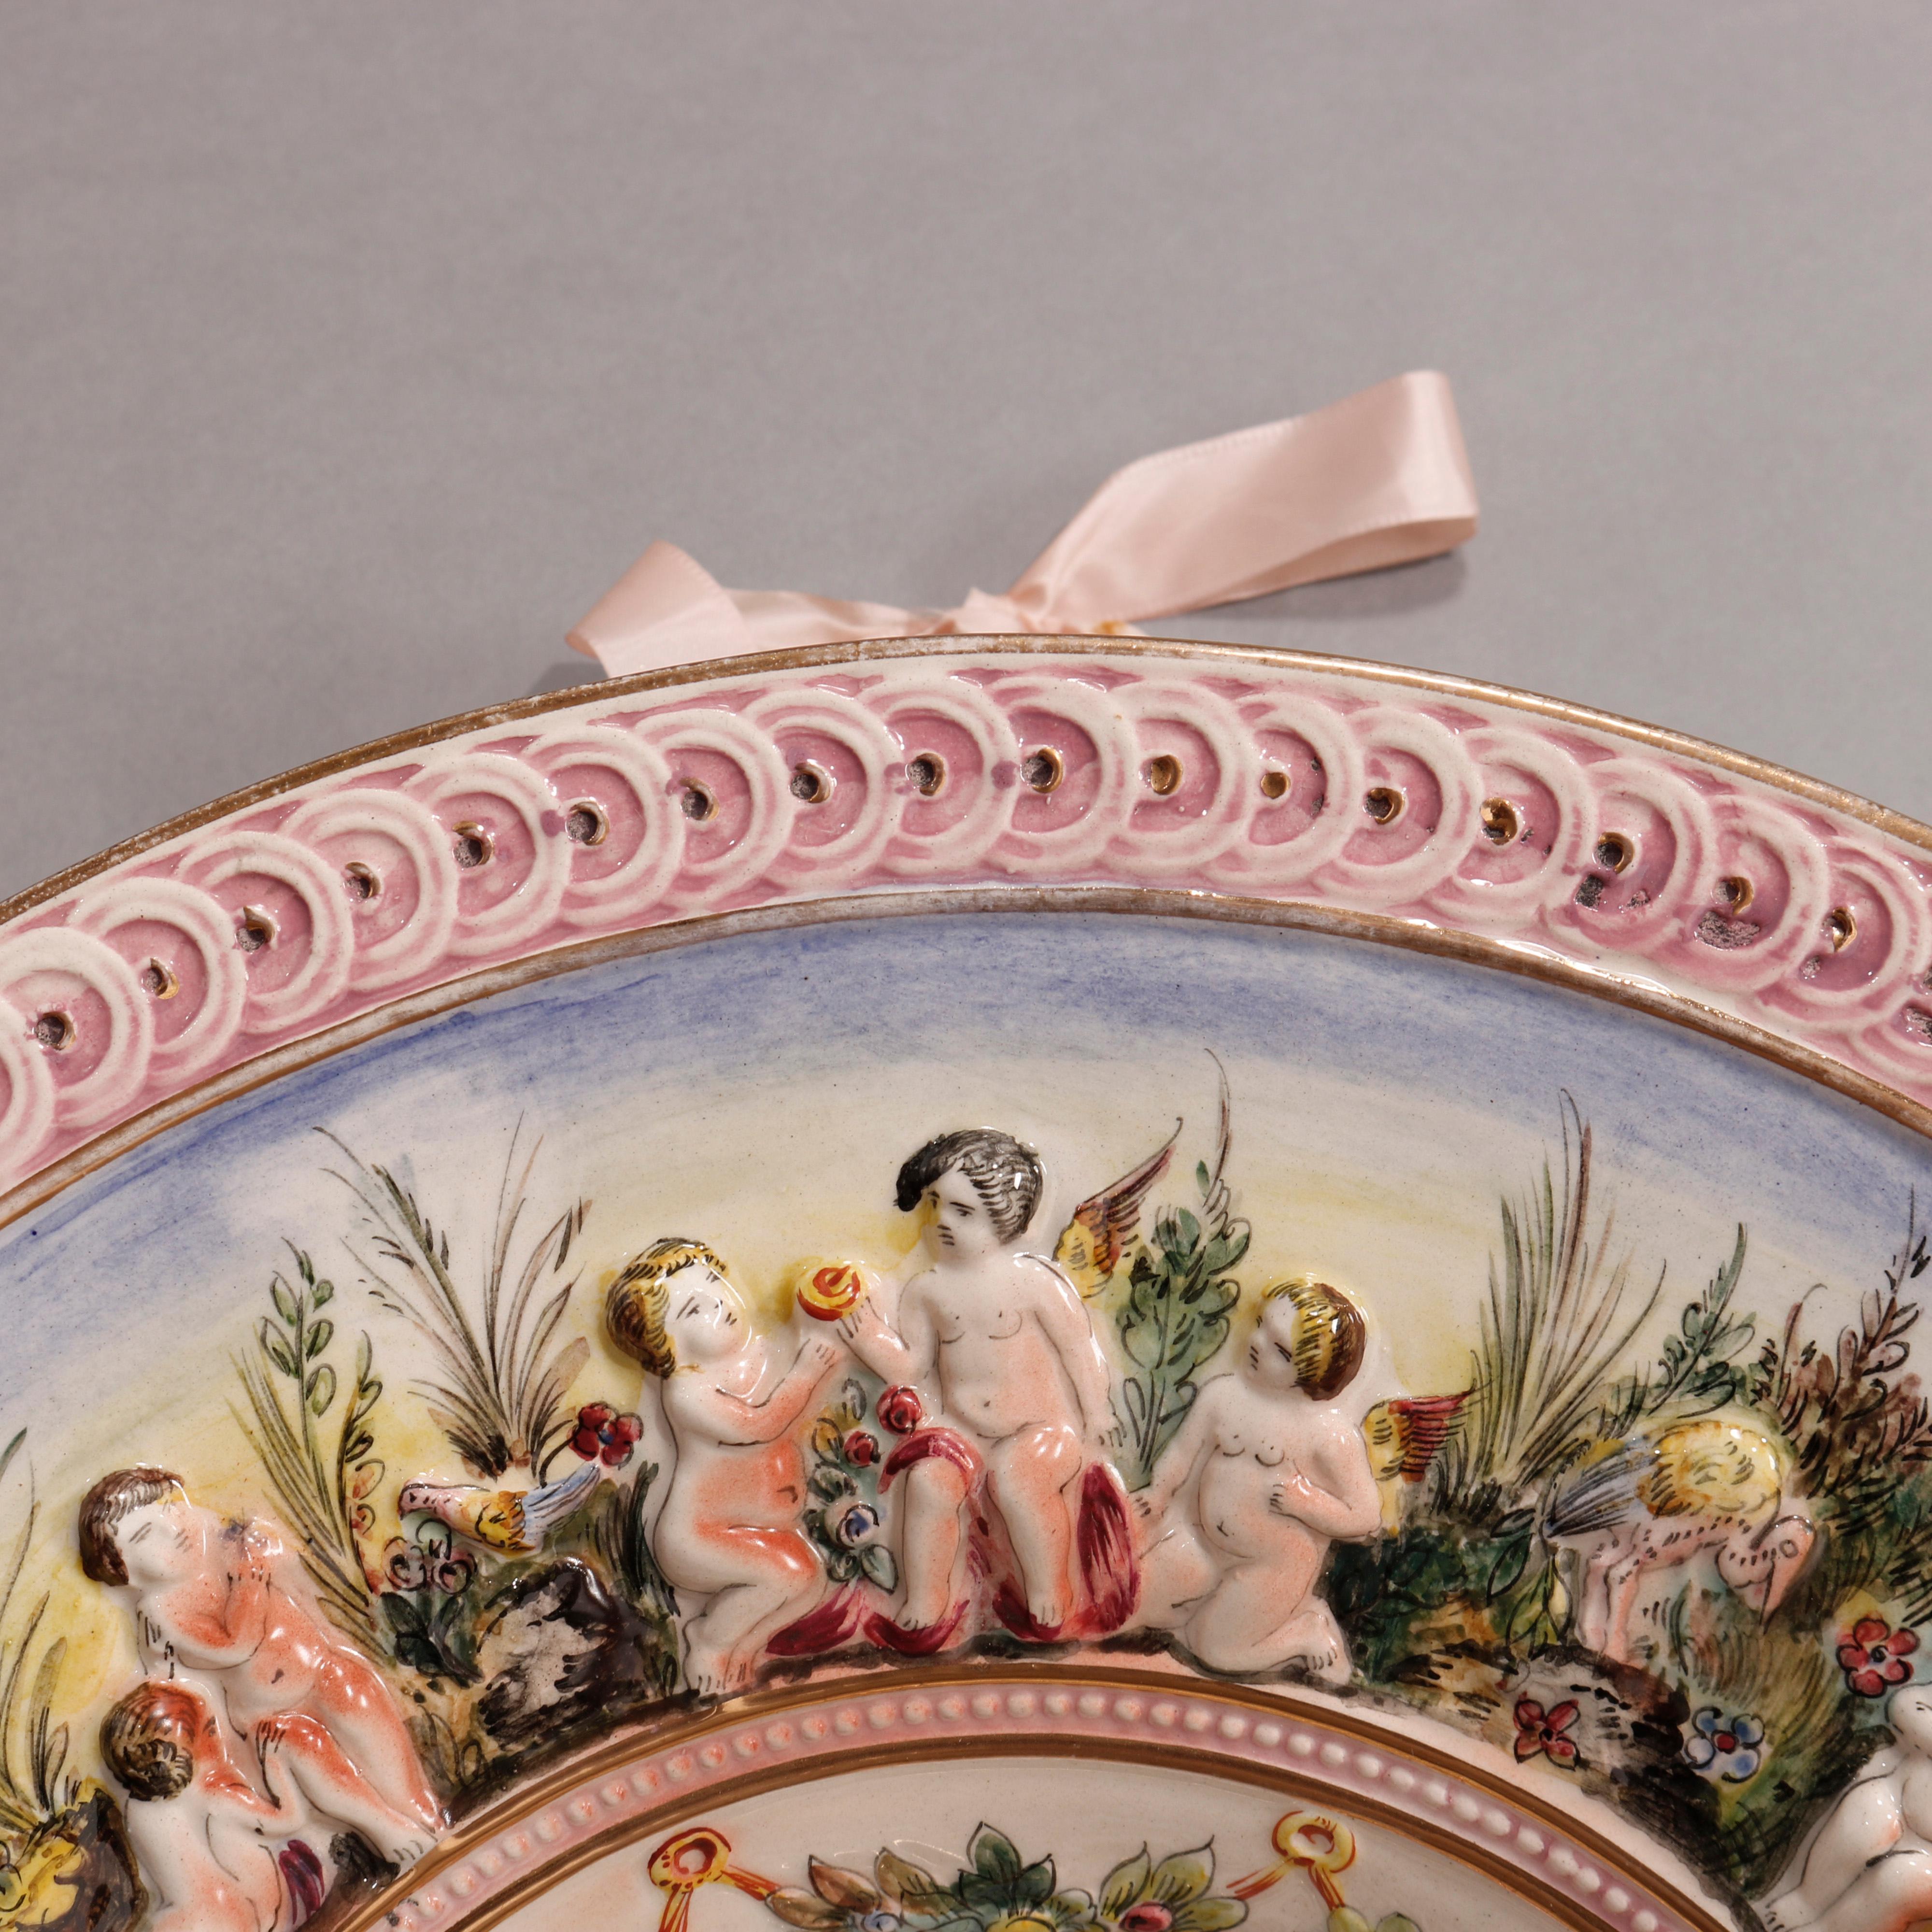 Large Italian Capodimonte Porcelain Center Bowl, Cherubs Scene in Relief, 20th C In Good Condition For Sale In Big Flats, NY